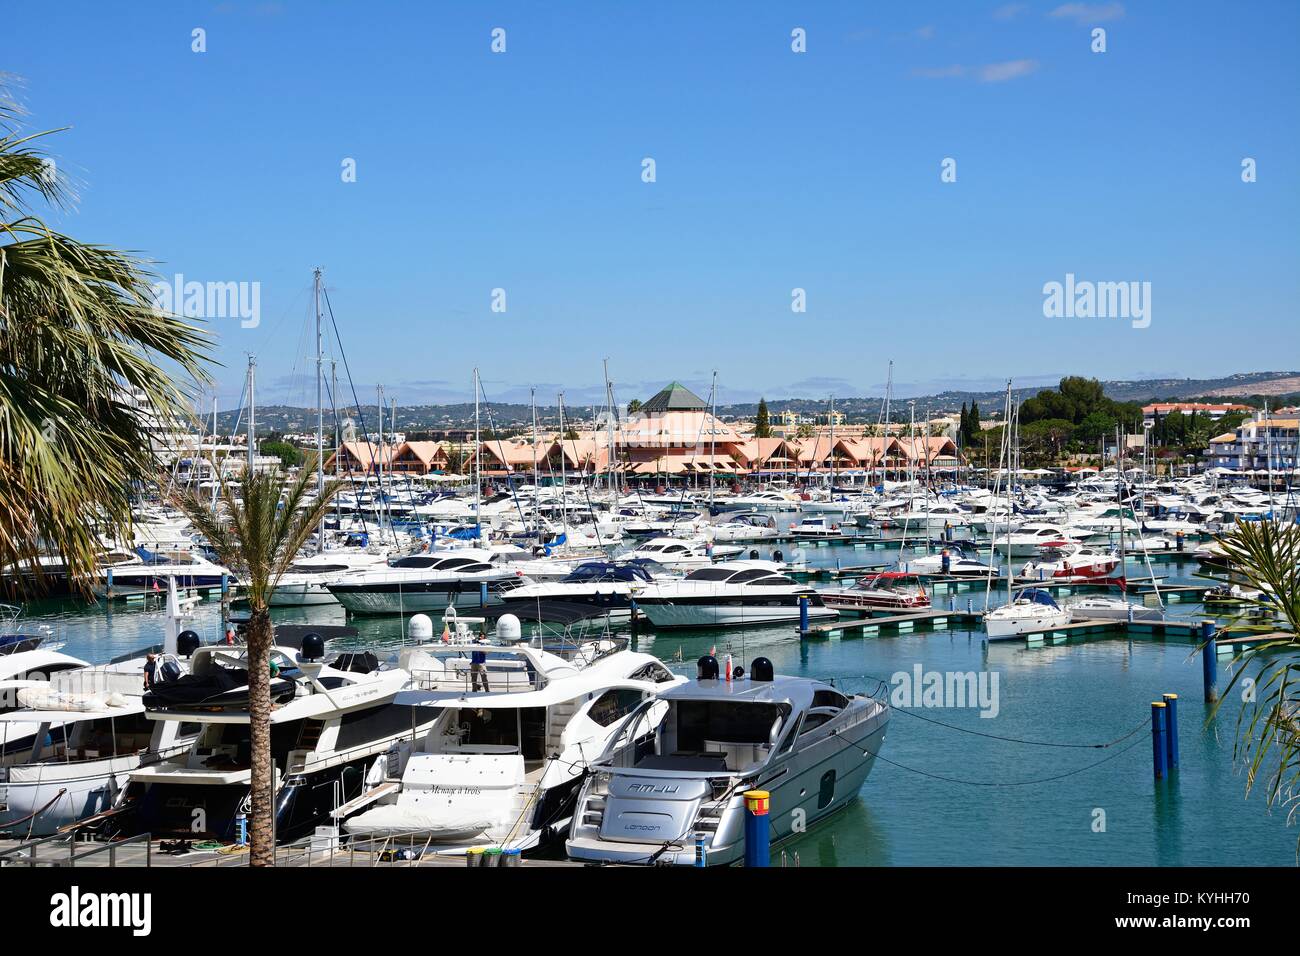 View of luxury yachts in the marina with buildings to the rear, Vilamoura, Algarve, Portugal, Europe. Stock Photo